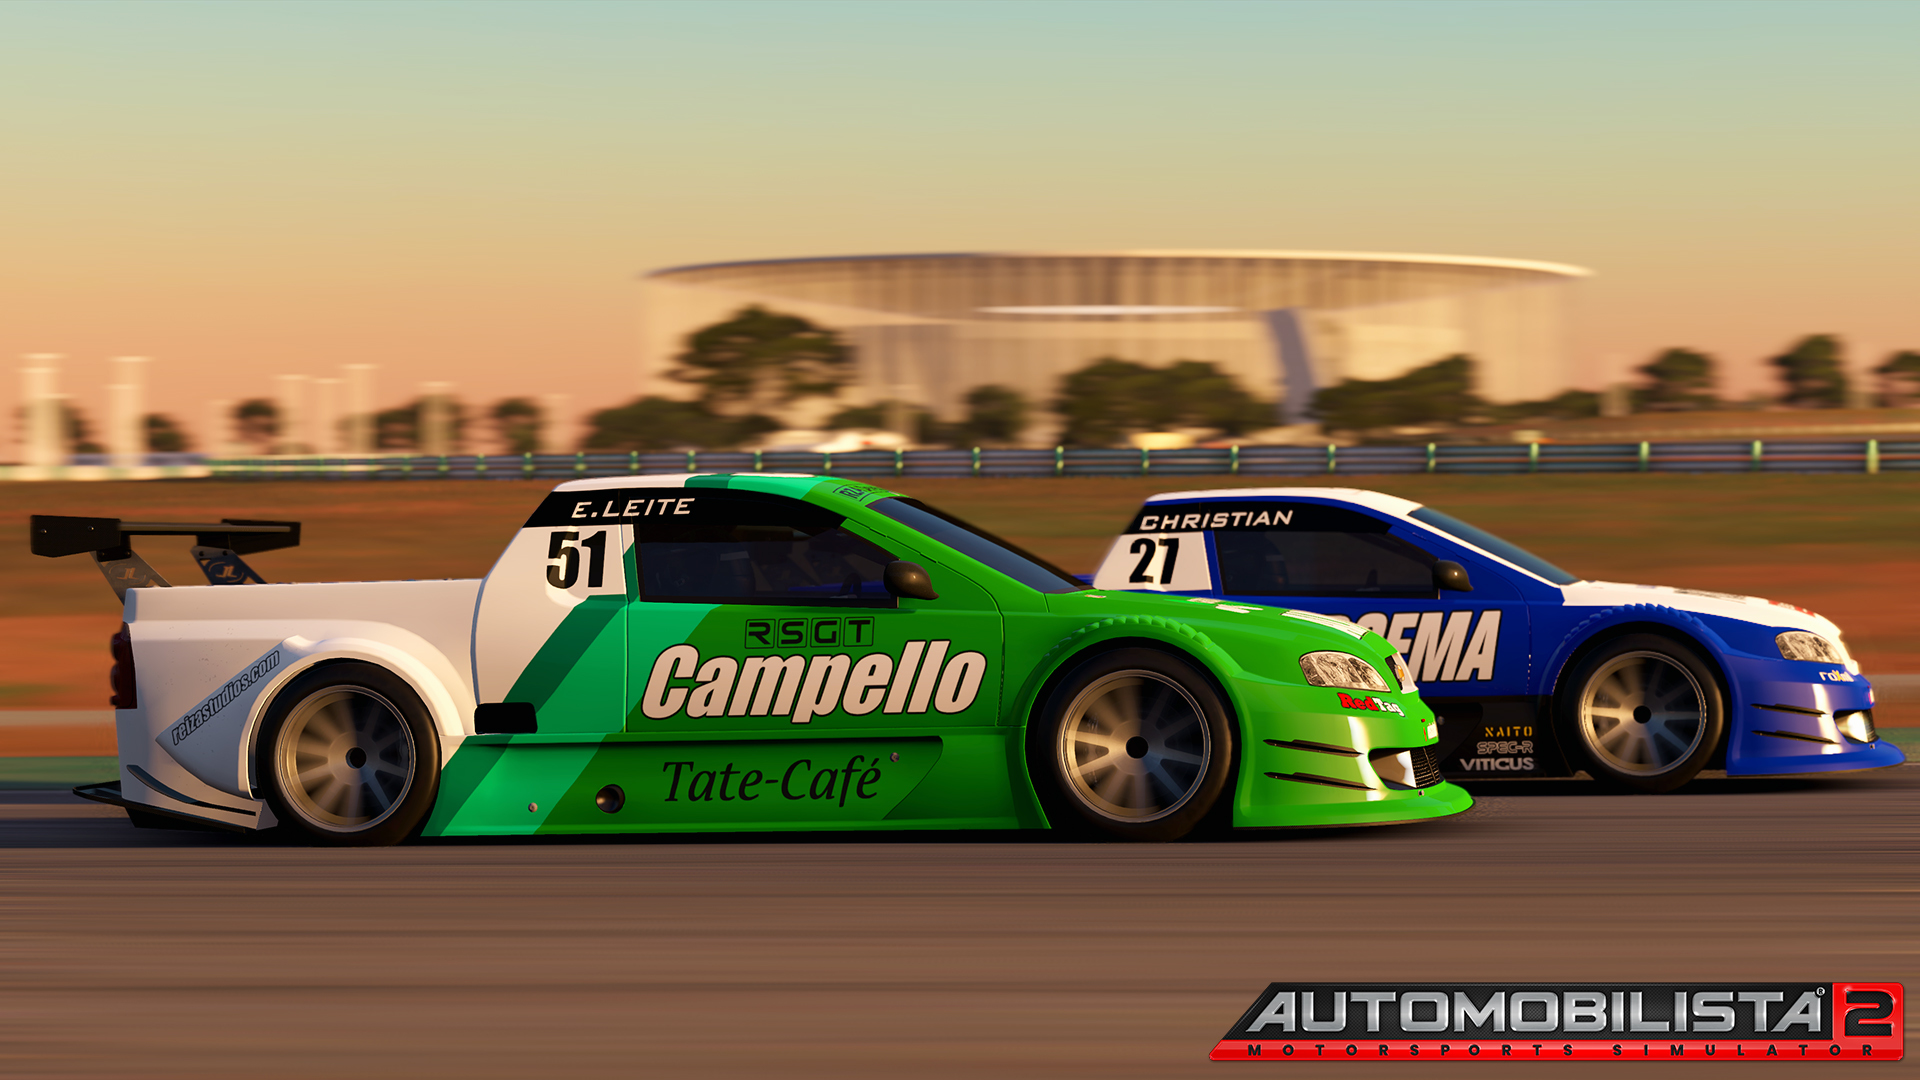 Automobilista 2 Car List  : Automobilista 2 Is The Culmination Of A Project Developed Over The Course Of Nearly A Decade.